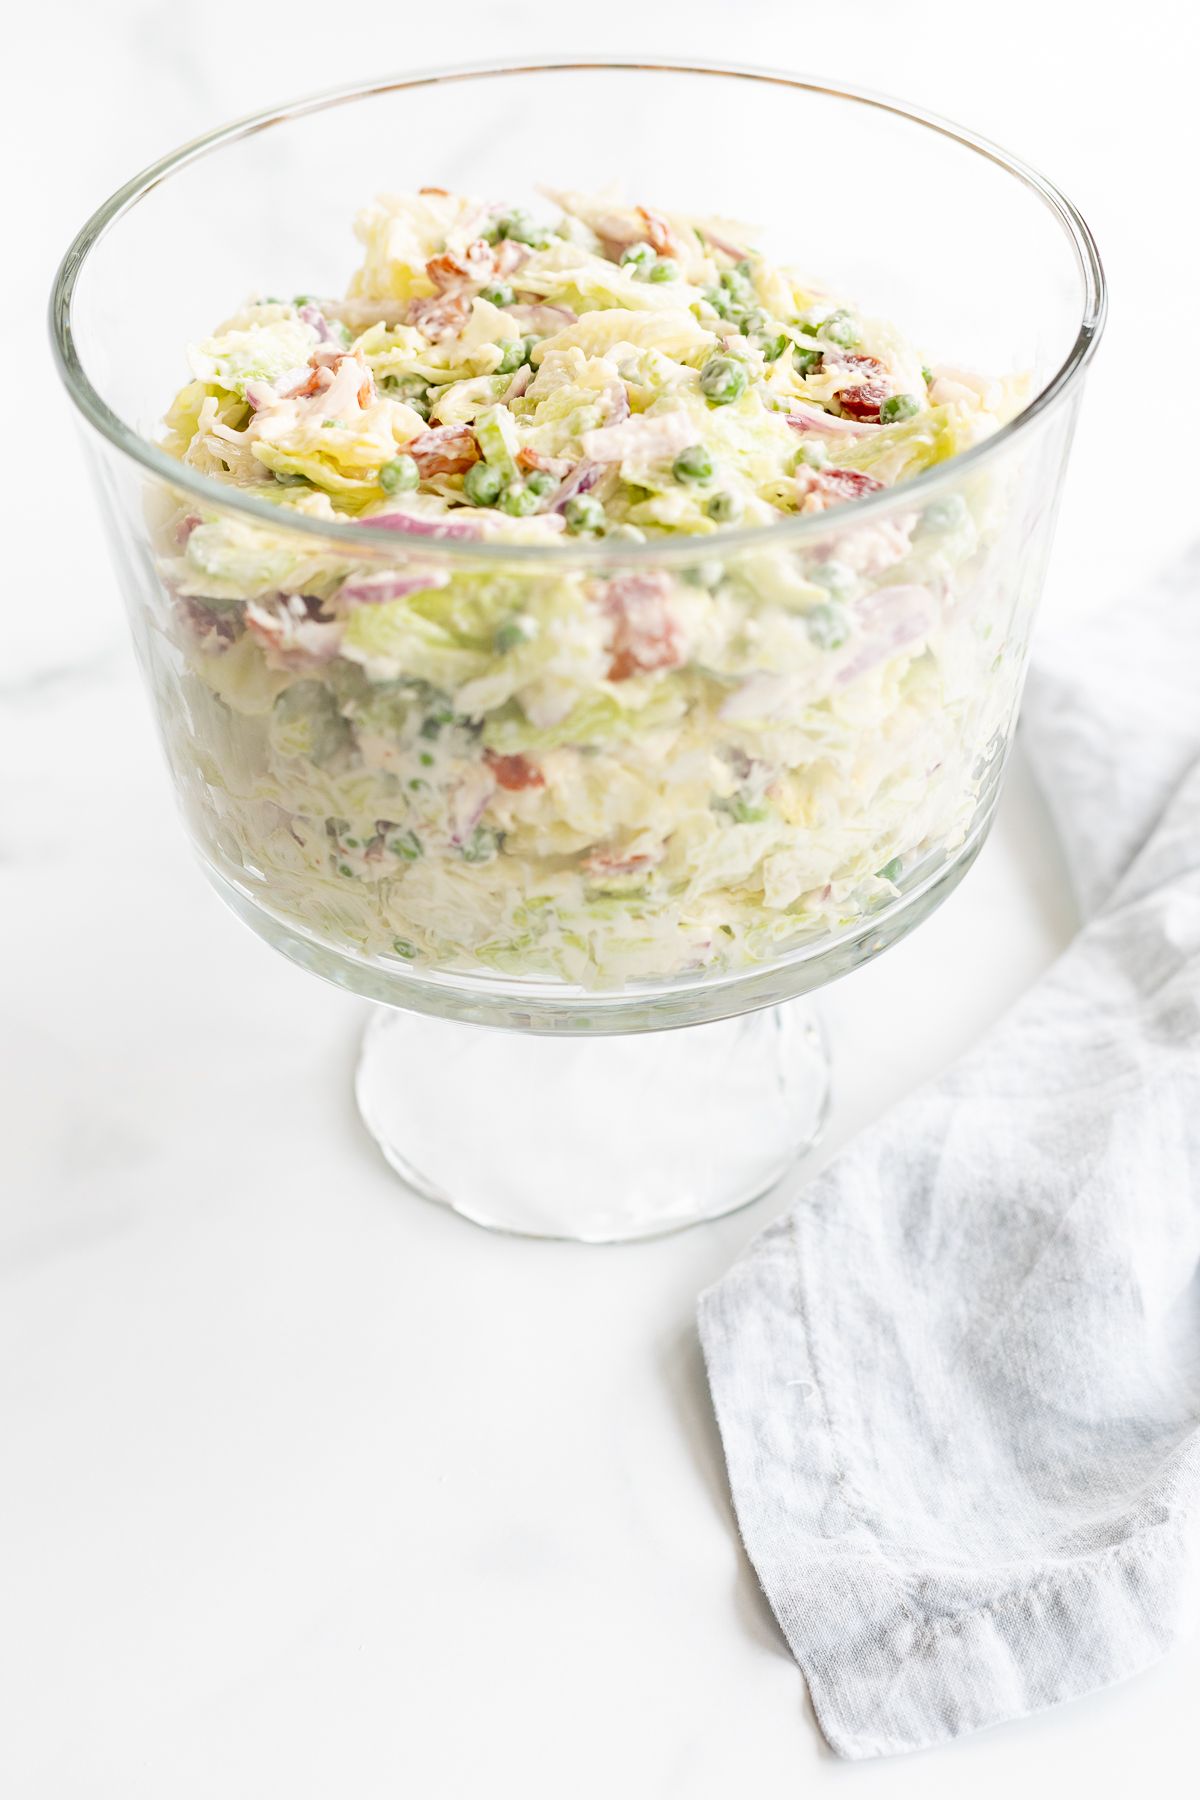 A 7 layer salad mixed up in a glass serving dish